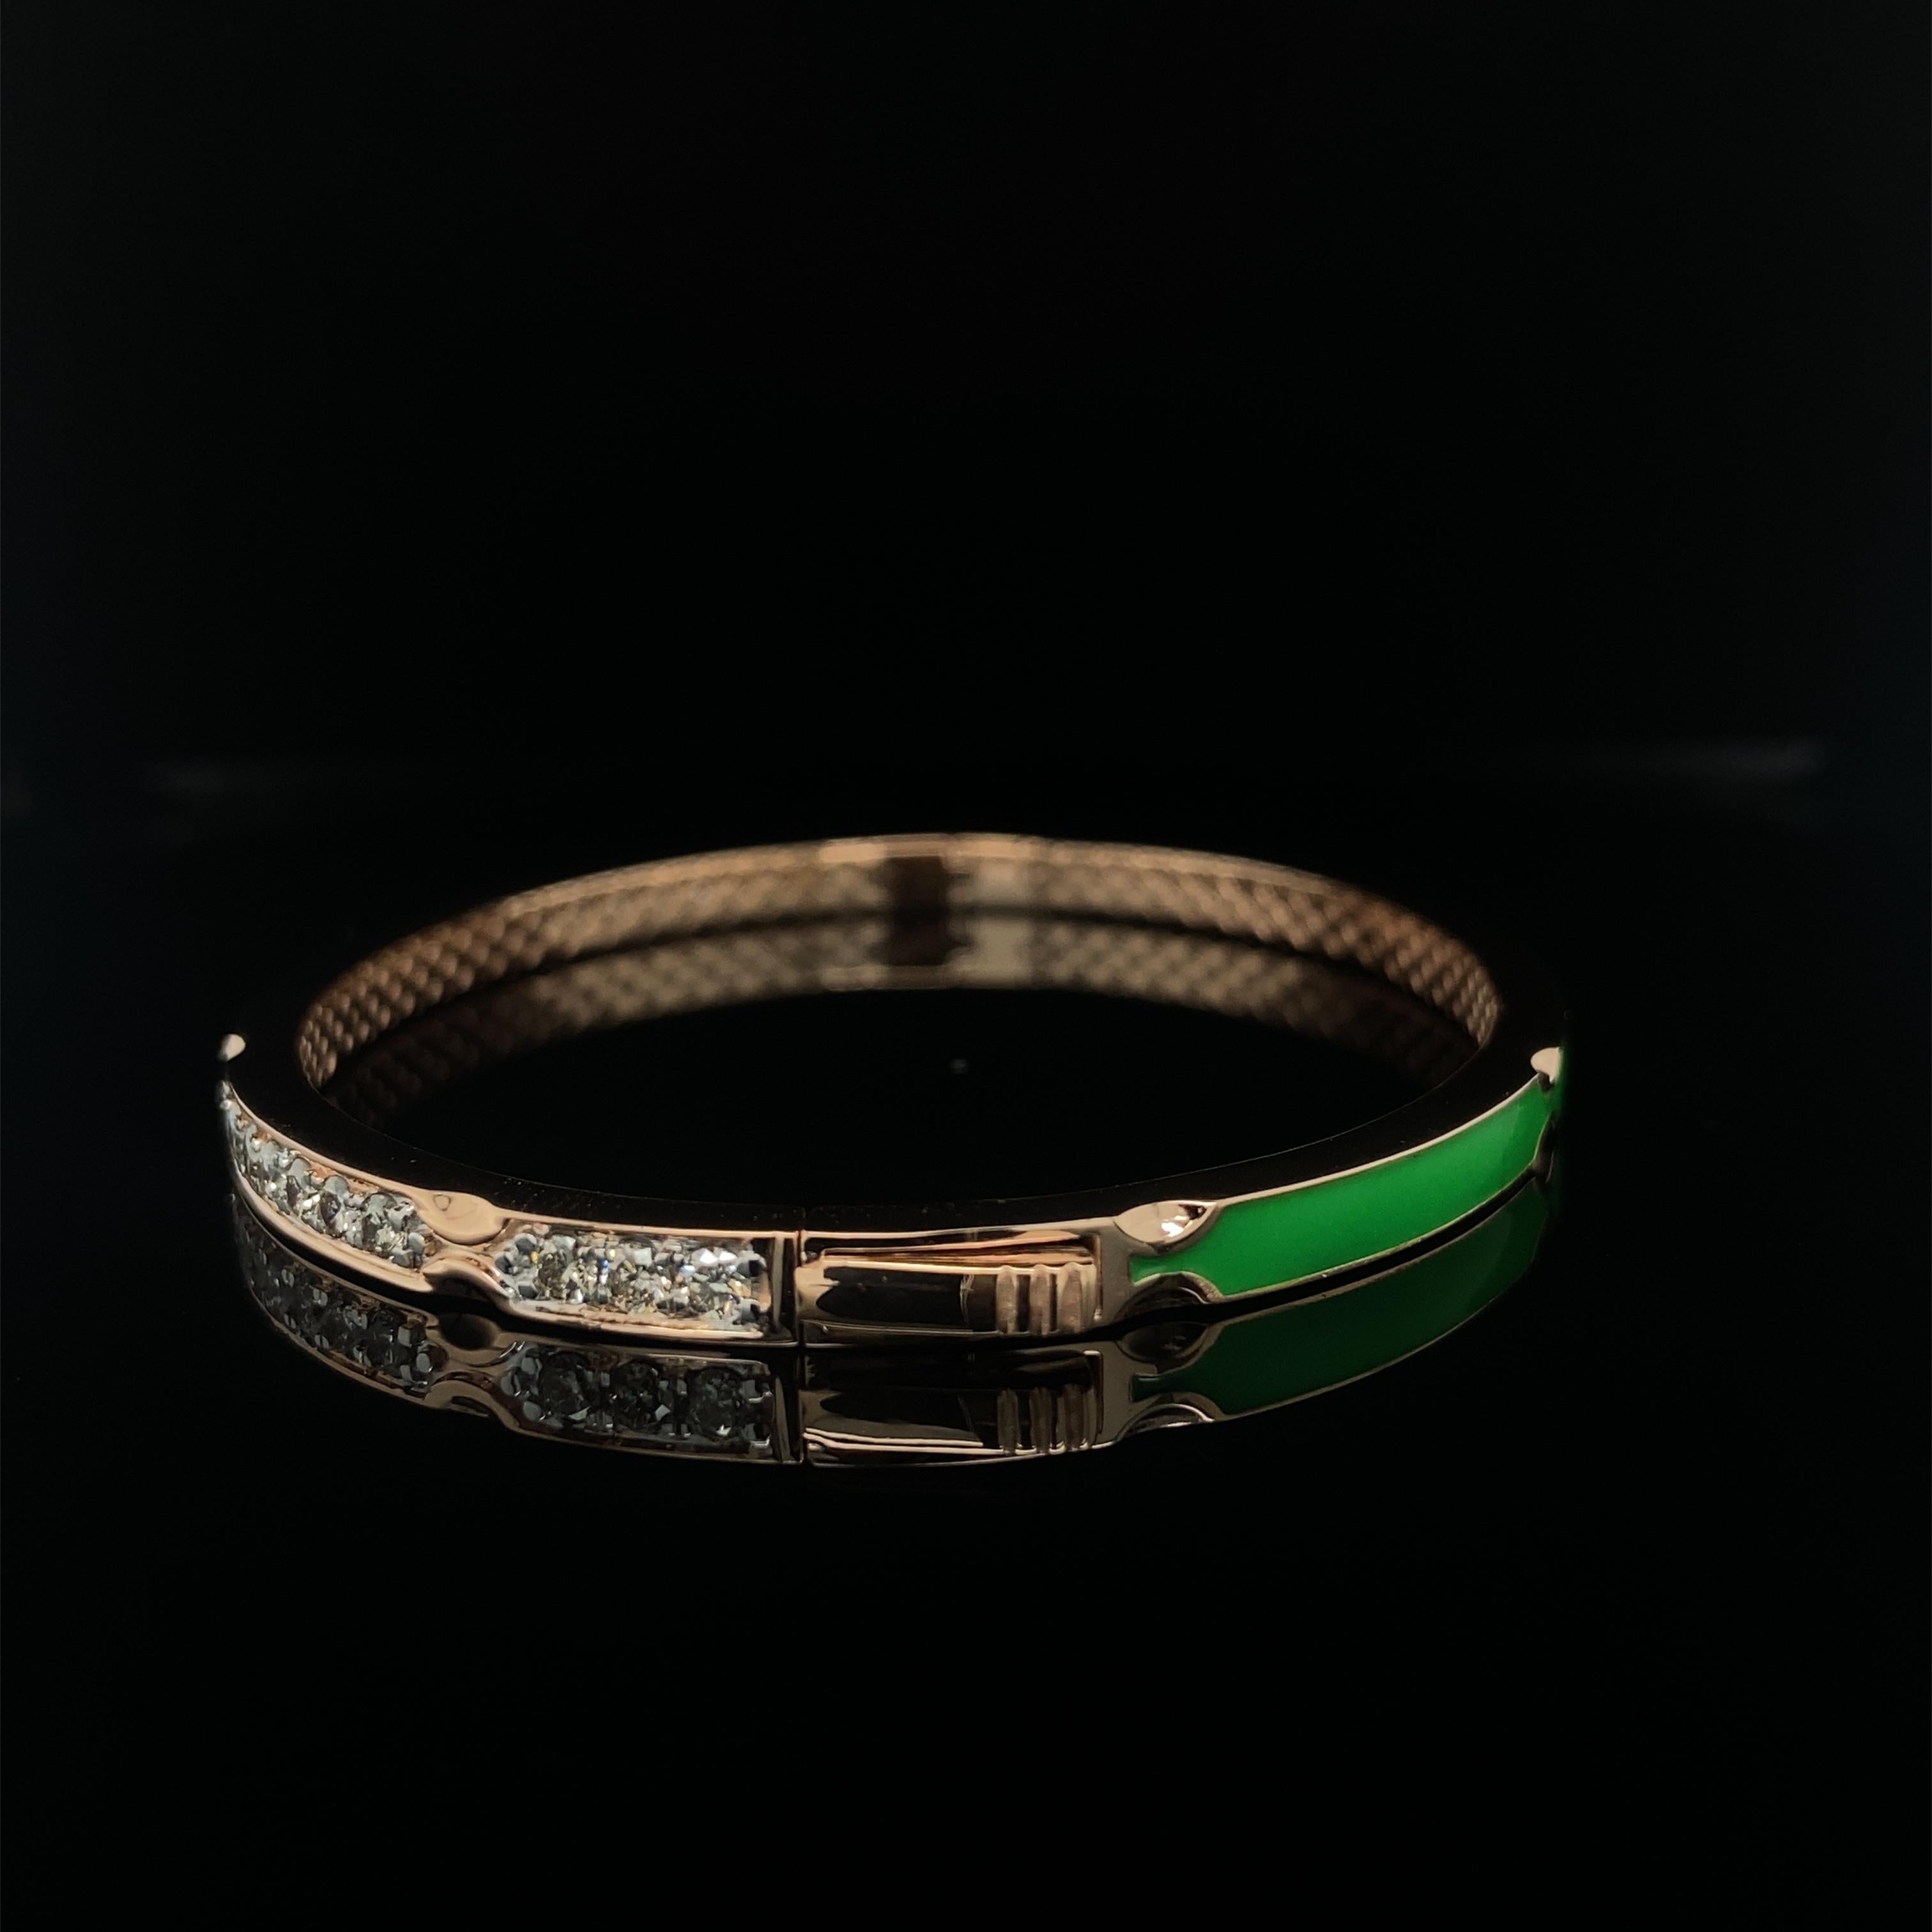 Round Cut Diamond Bracelet with Green Enamelling set in 18k Solid Gold For Sale